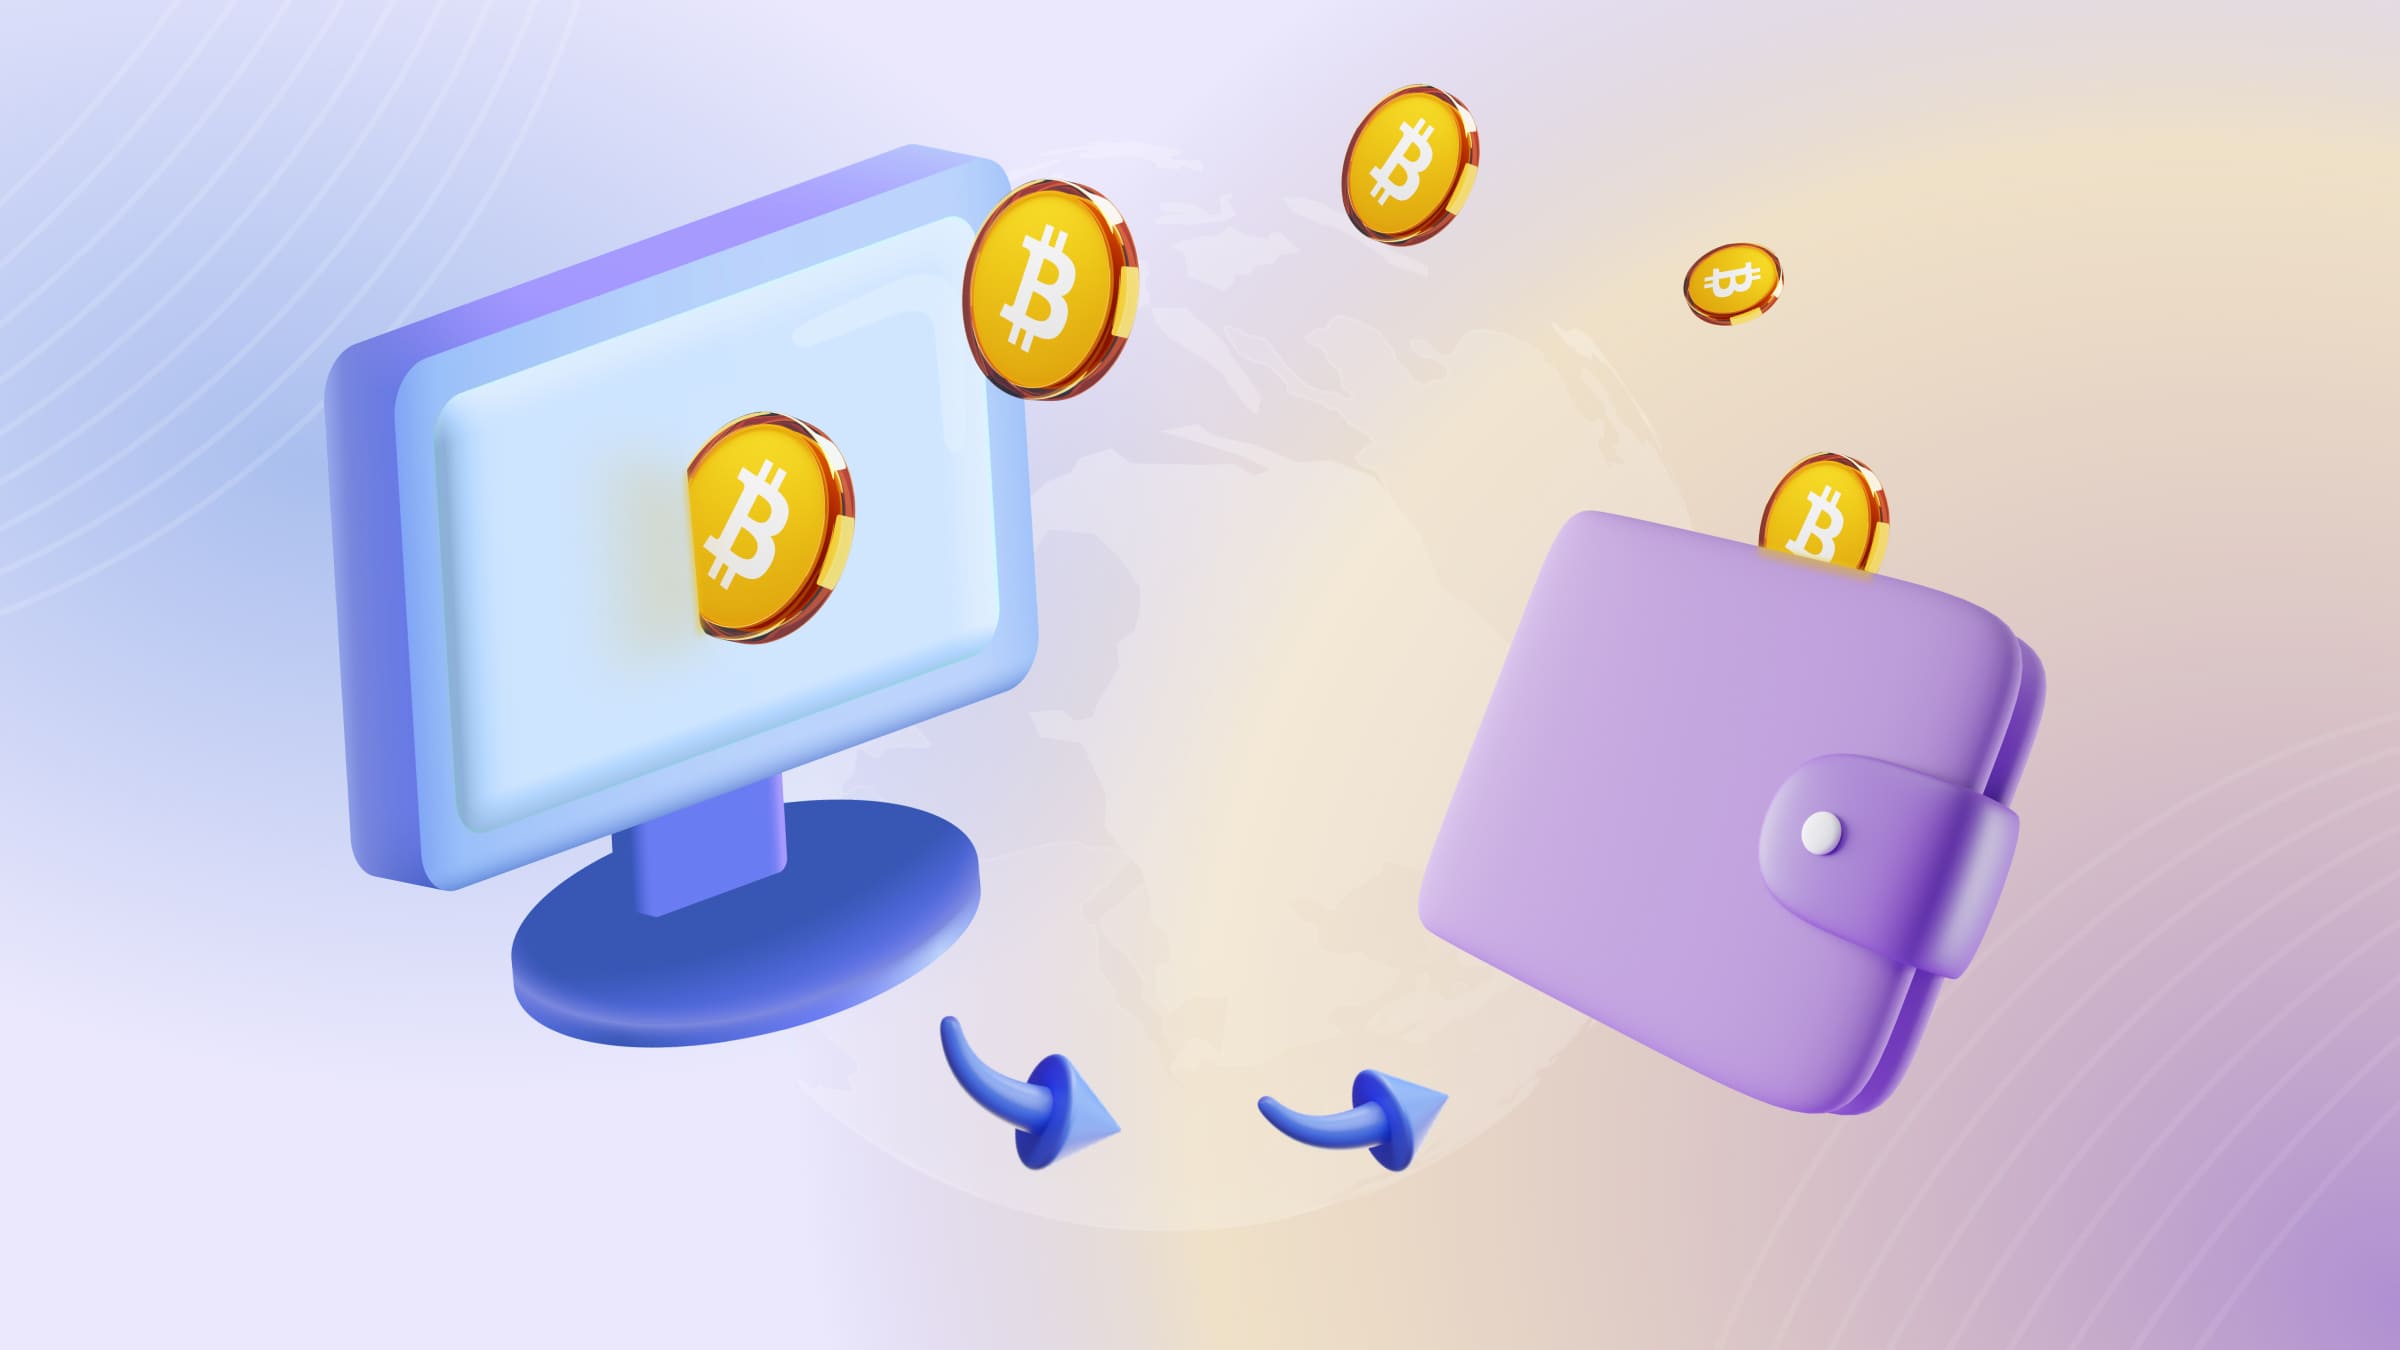 Cryptocurrency wallets allow you to store digital assets and conduct transactions with them.